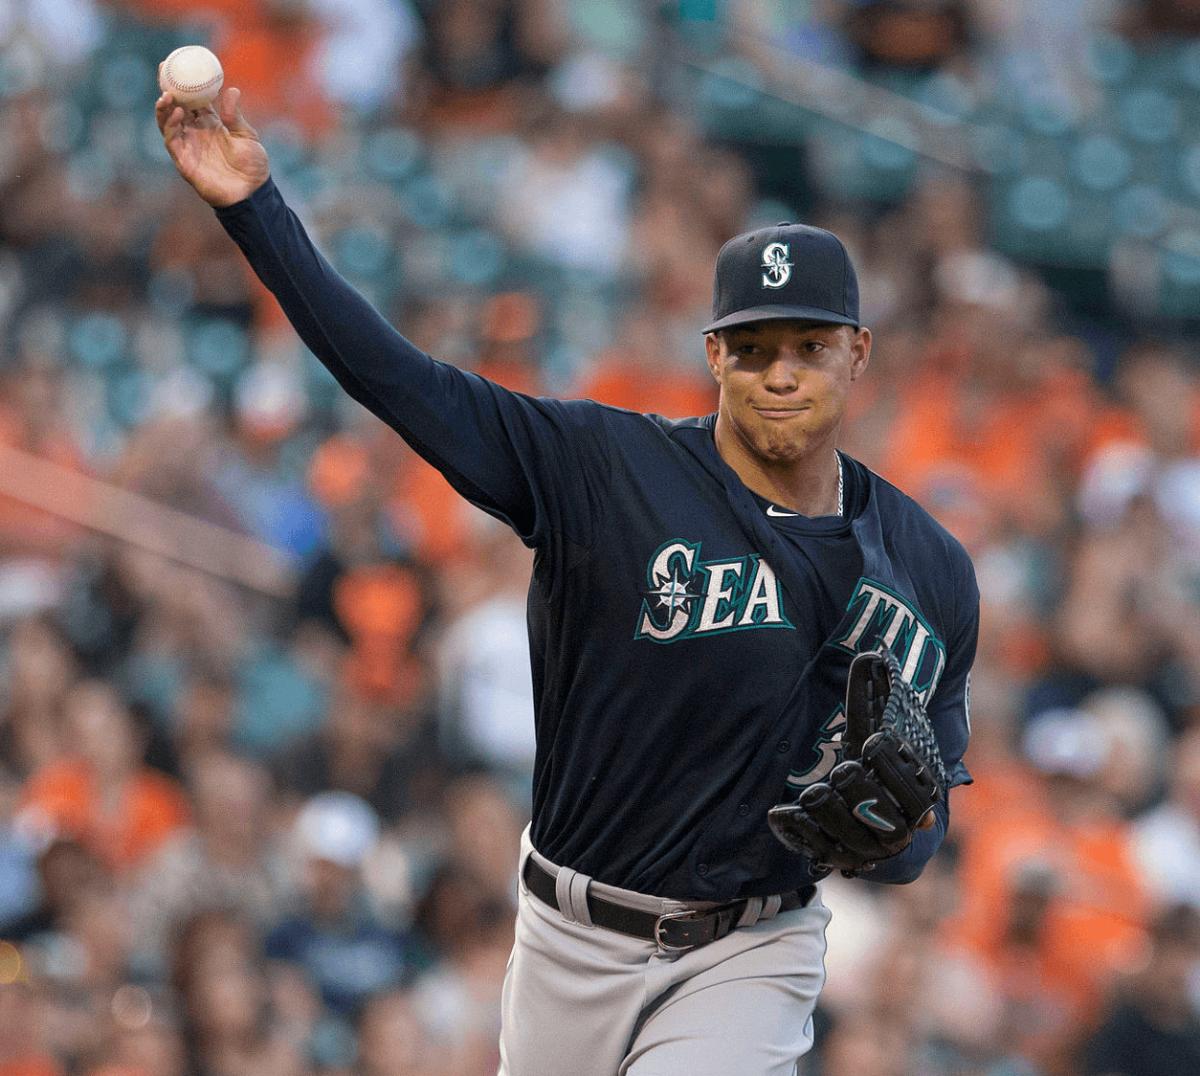 Taijuan Walker – Photo by Keith Allison from Hanover, MD, USA / CC BY-SA (https://creativecommons.org/licenses/by-sa/2.0)